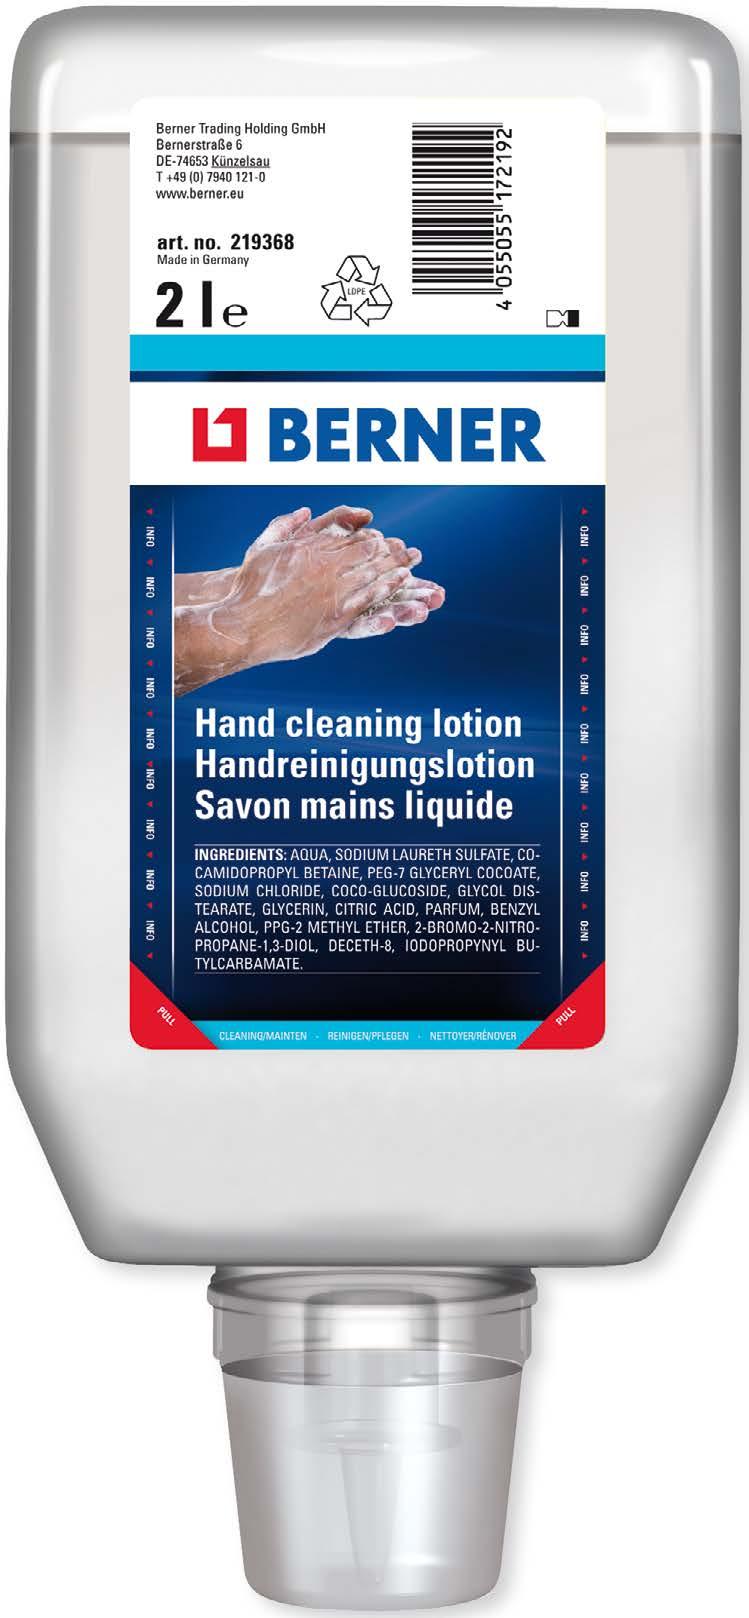 HAND CLEANING LOTION Gentle Cleansing for your hands CLEANS THOROUGHLY: soft and gentle hand care. SCENT: pleasant fresh scent and ph-neutral.